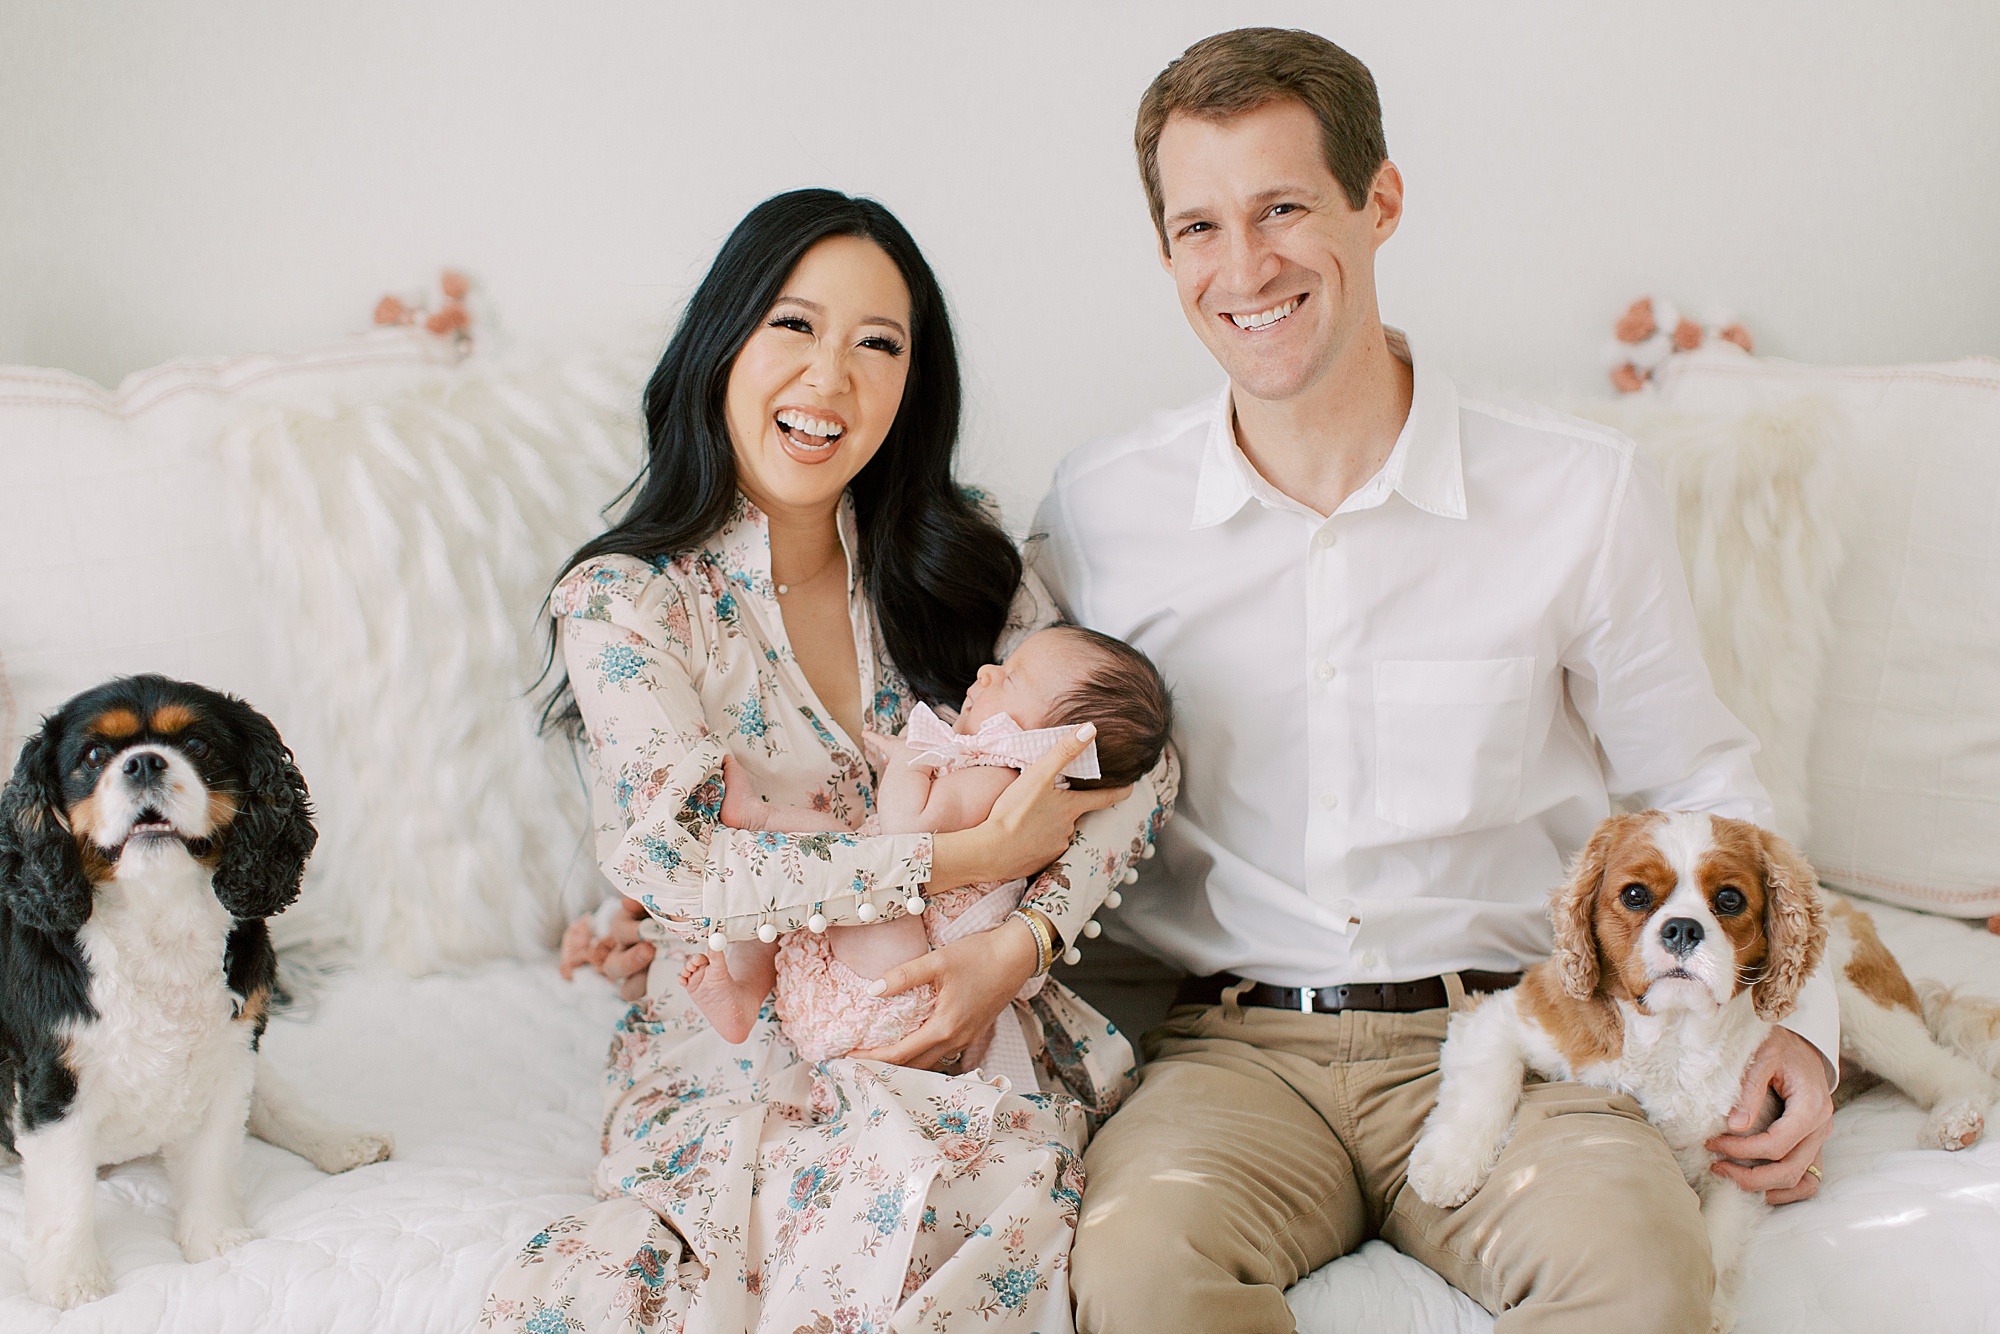 parents pose with dogs and baby girl